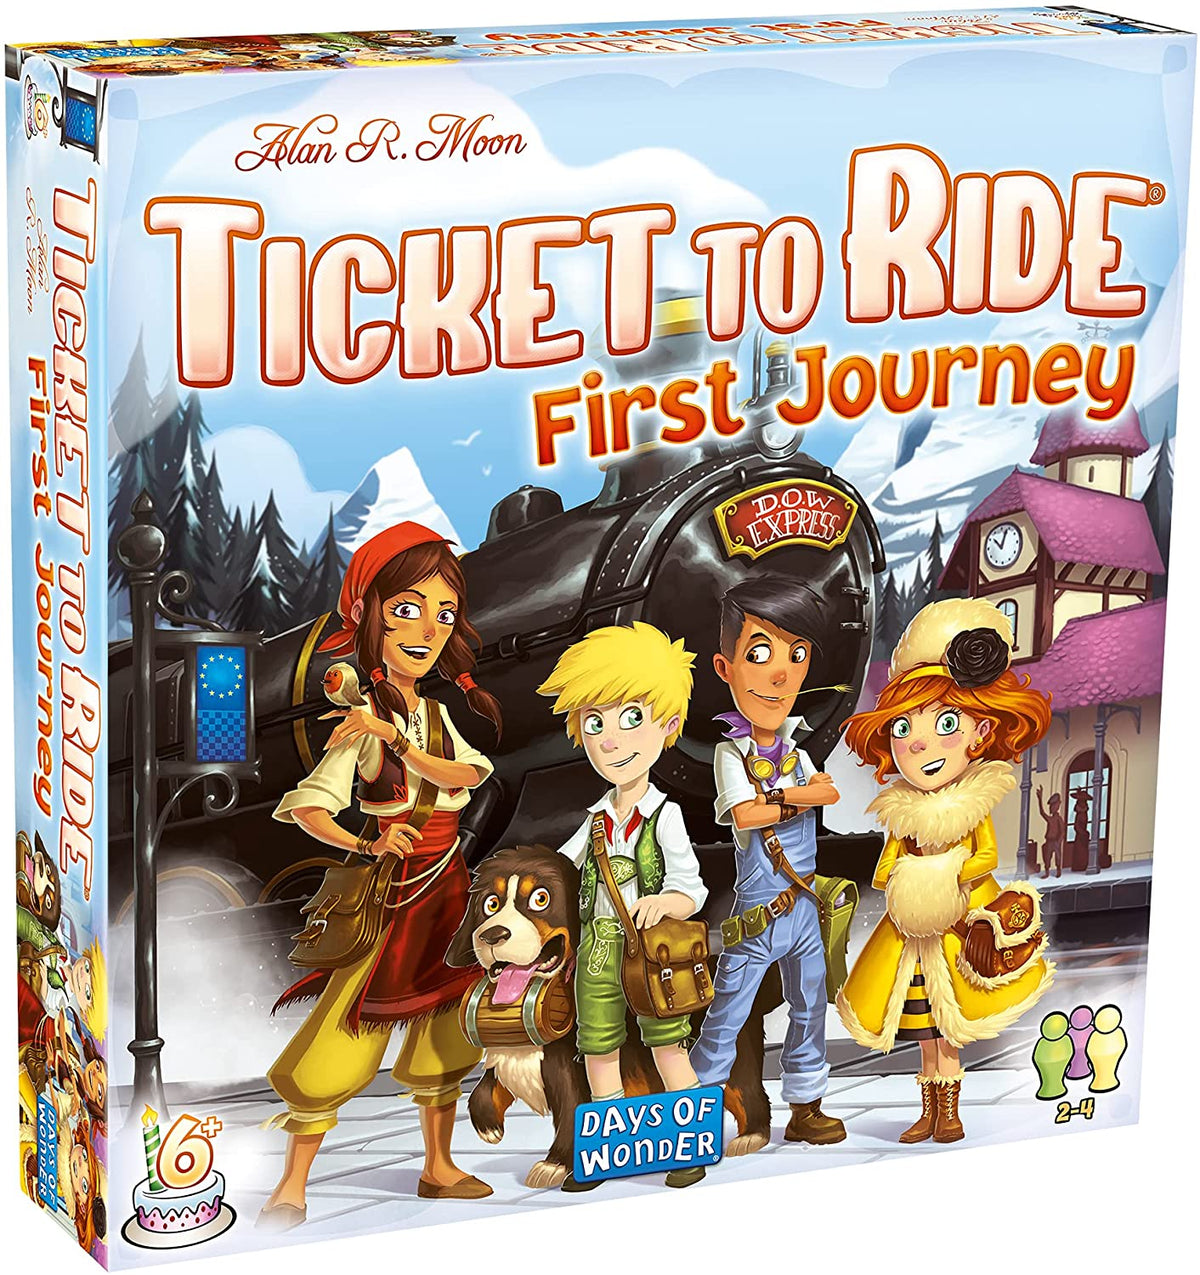 Ticket To Ride Europe: First Journey